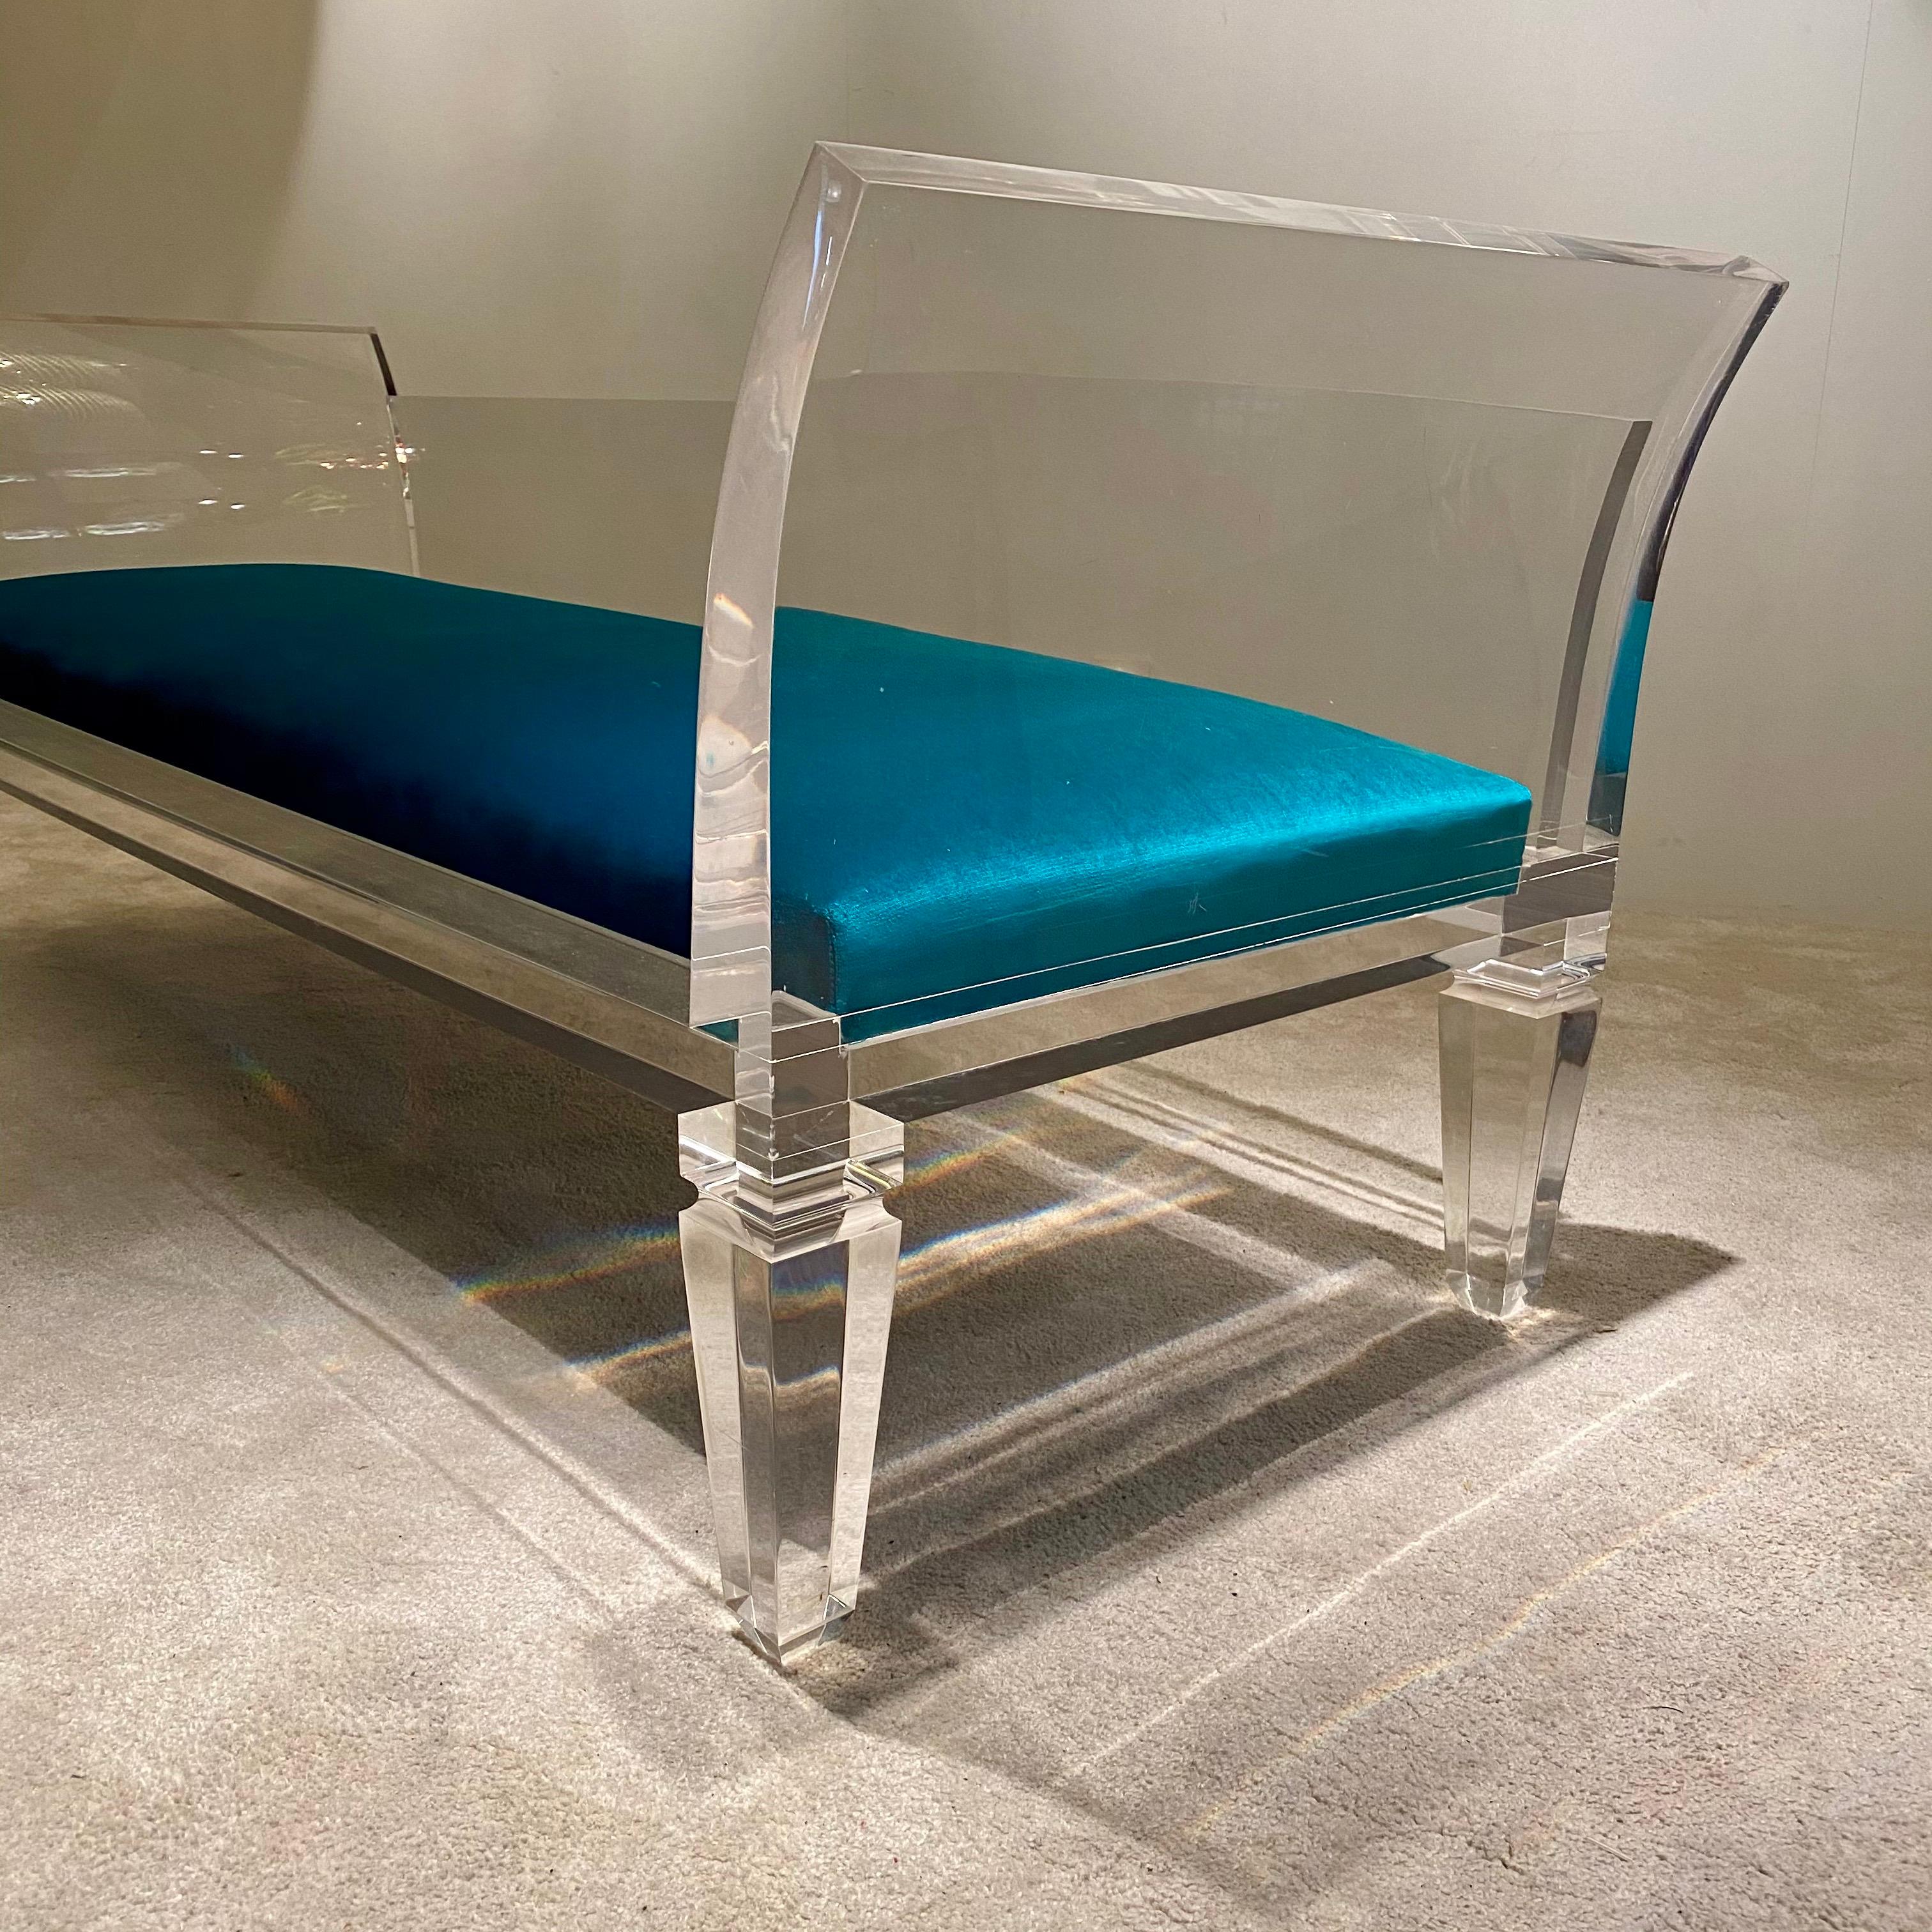 Sofa by Maison Jansen in massive and thick lucite. The french taste with shapes and lines in the neoclassic style.